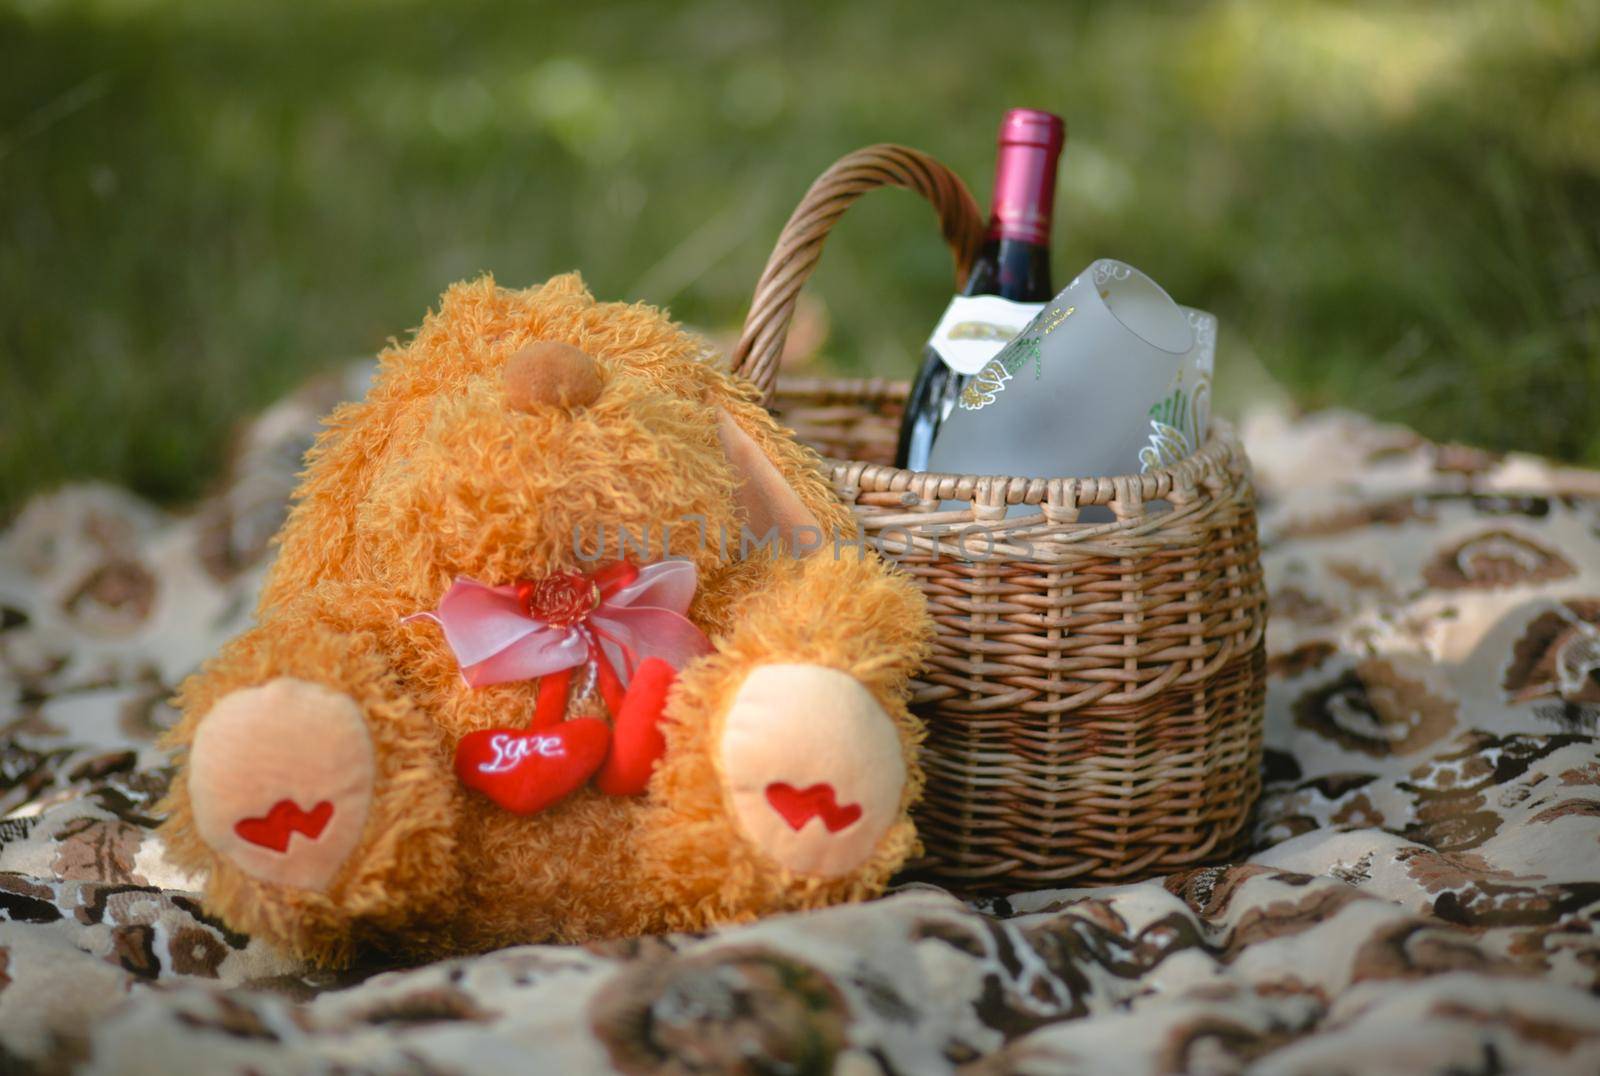 Wicker basket with picnic set. A bottle of wine and a Teddy bear by deandy